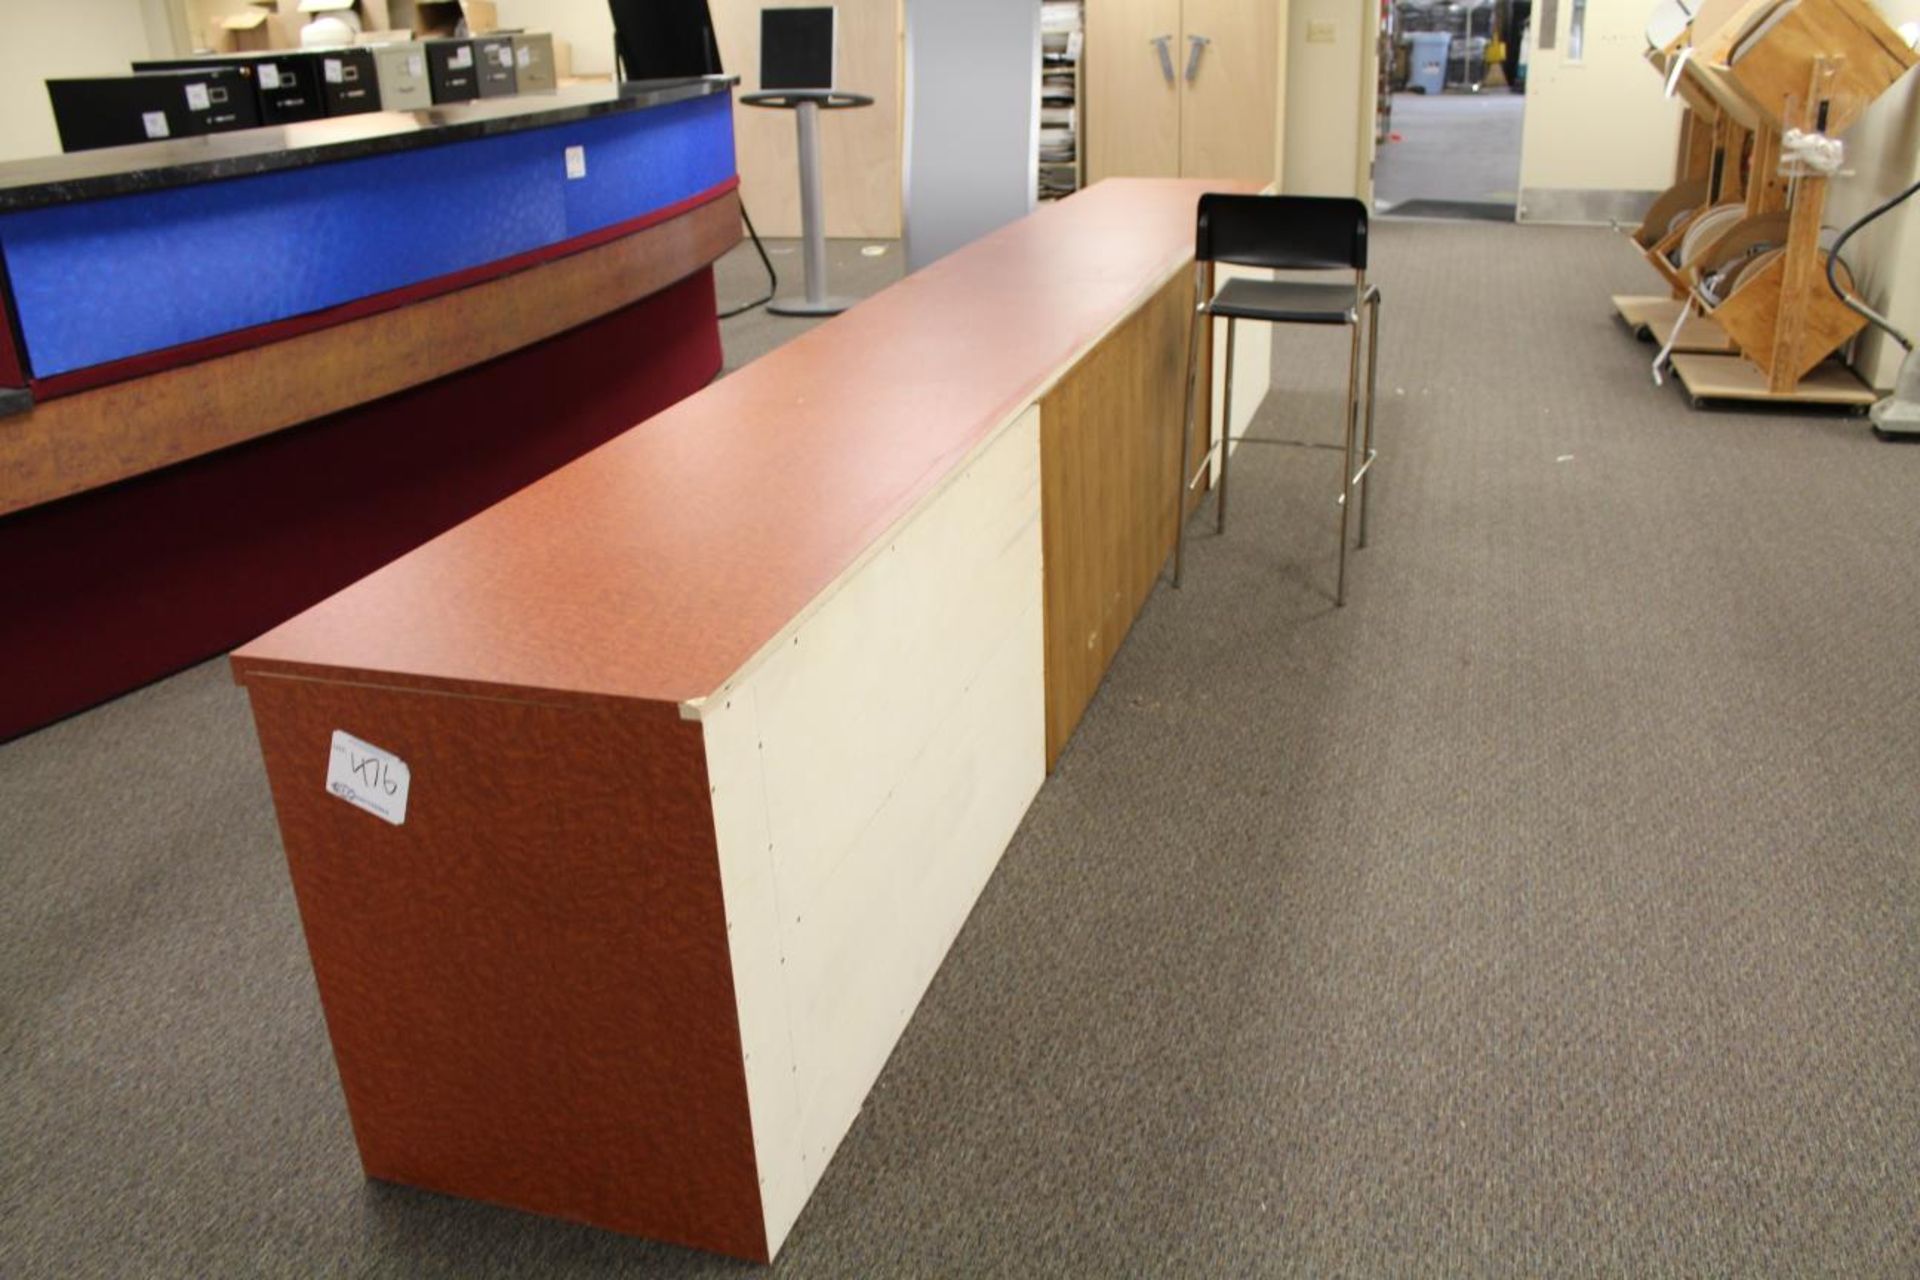 Light Weight Reception Counter and Cabinets.  Approximate Dimensions: Counter 175"x42"x45"H, - Image 6 of 6